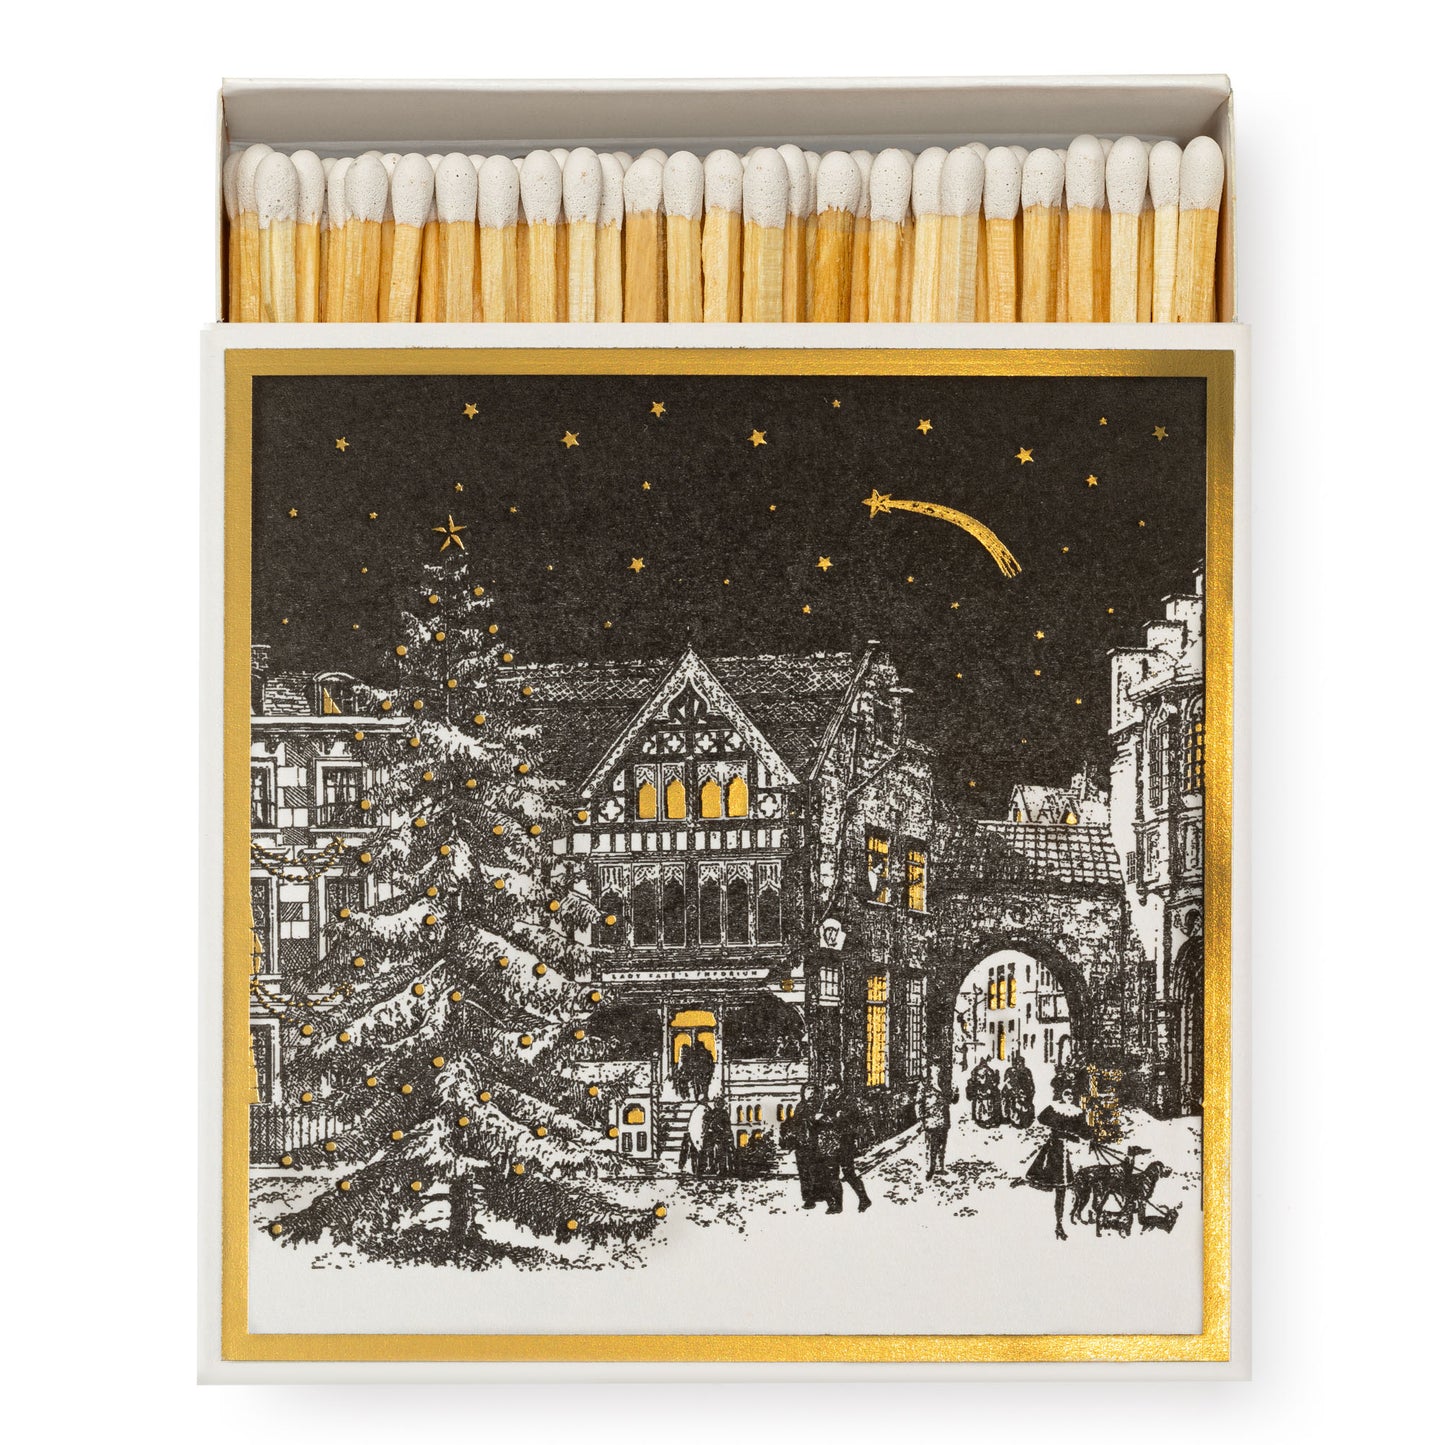 Starry Night - Square Box Of Luxury Matches